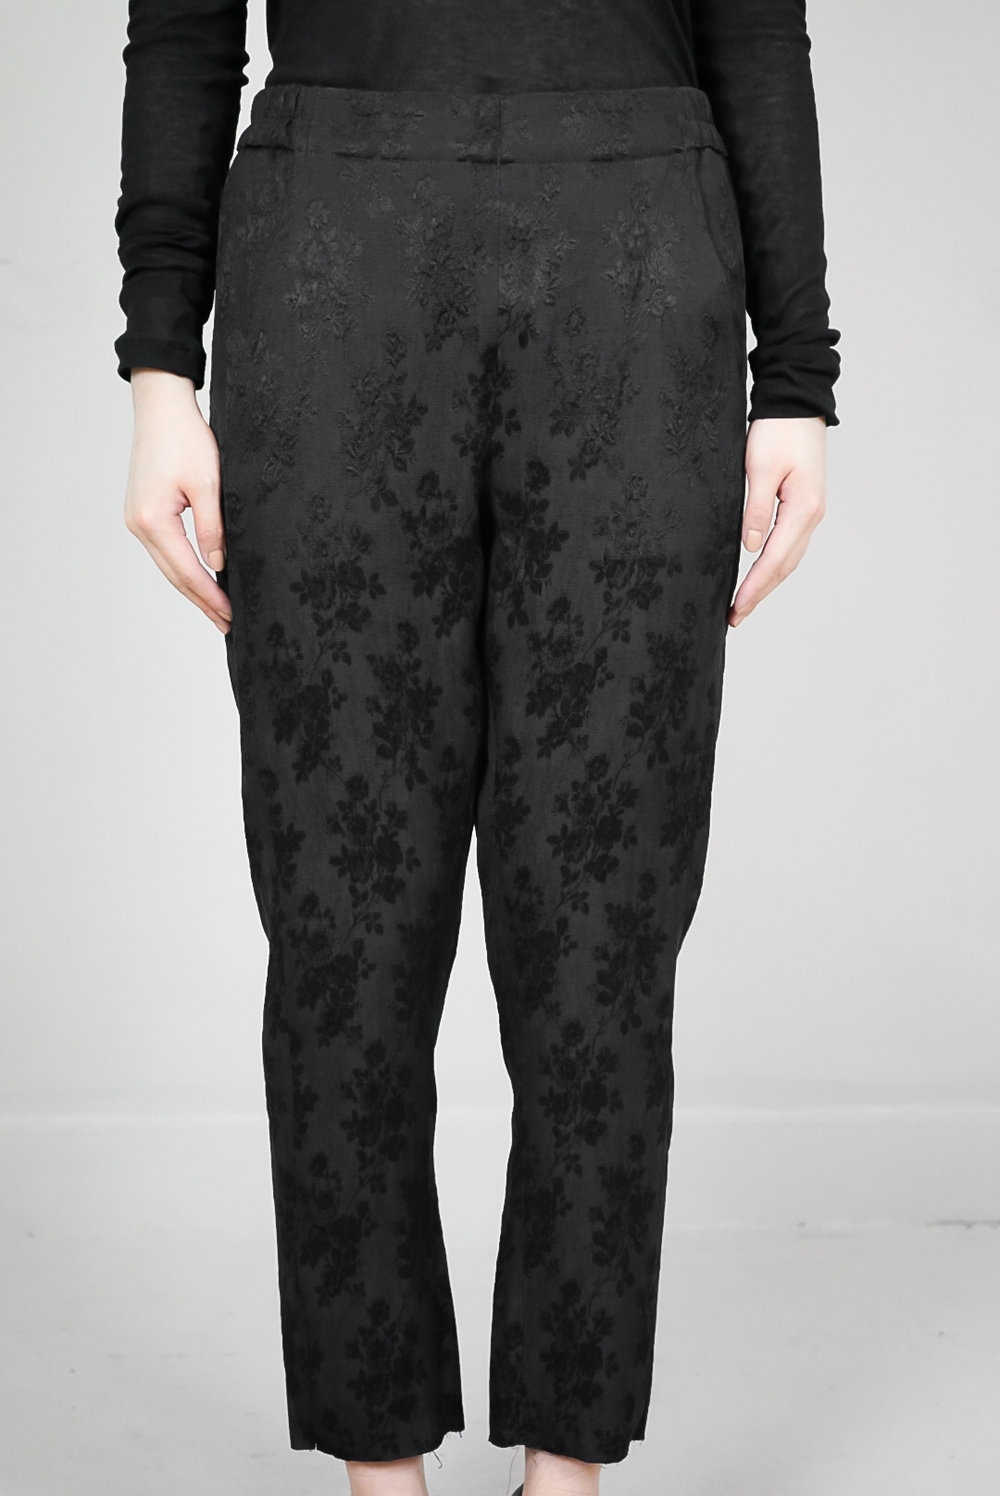 Ann Demeulemeester – Womens – Trousers – Black – Silk / Cotton – Floral Embroidered – Cropped Length – Elasticated Waistband